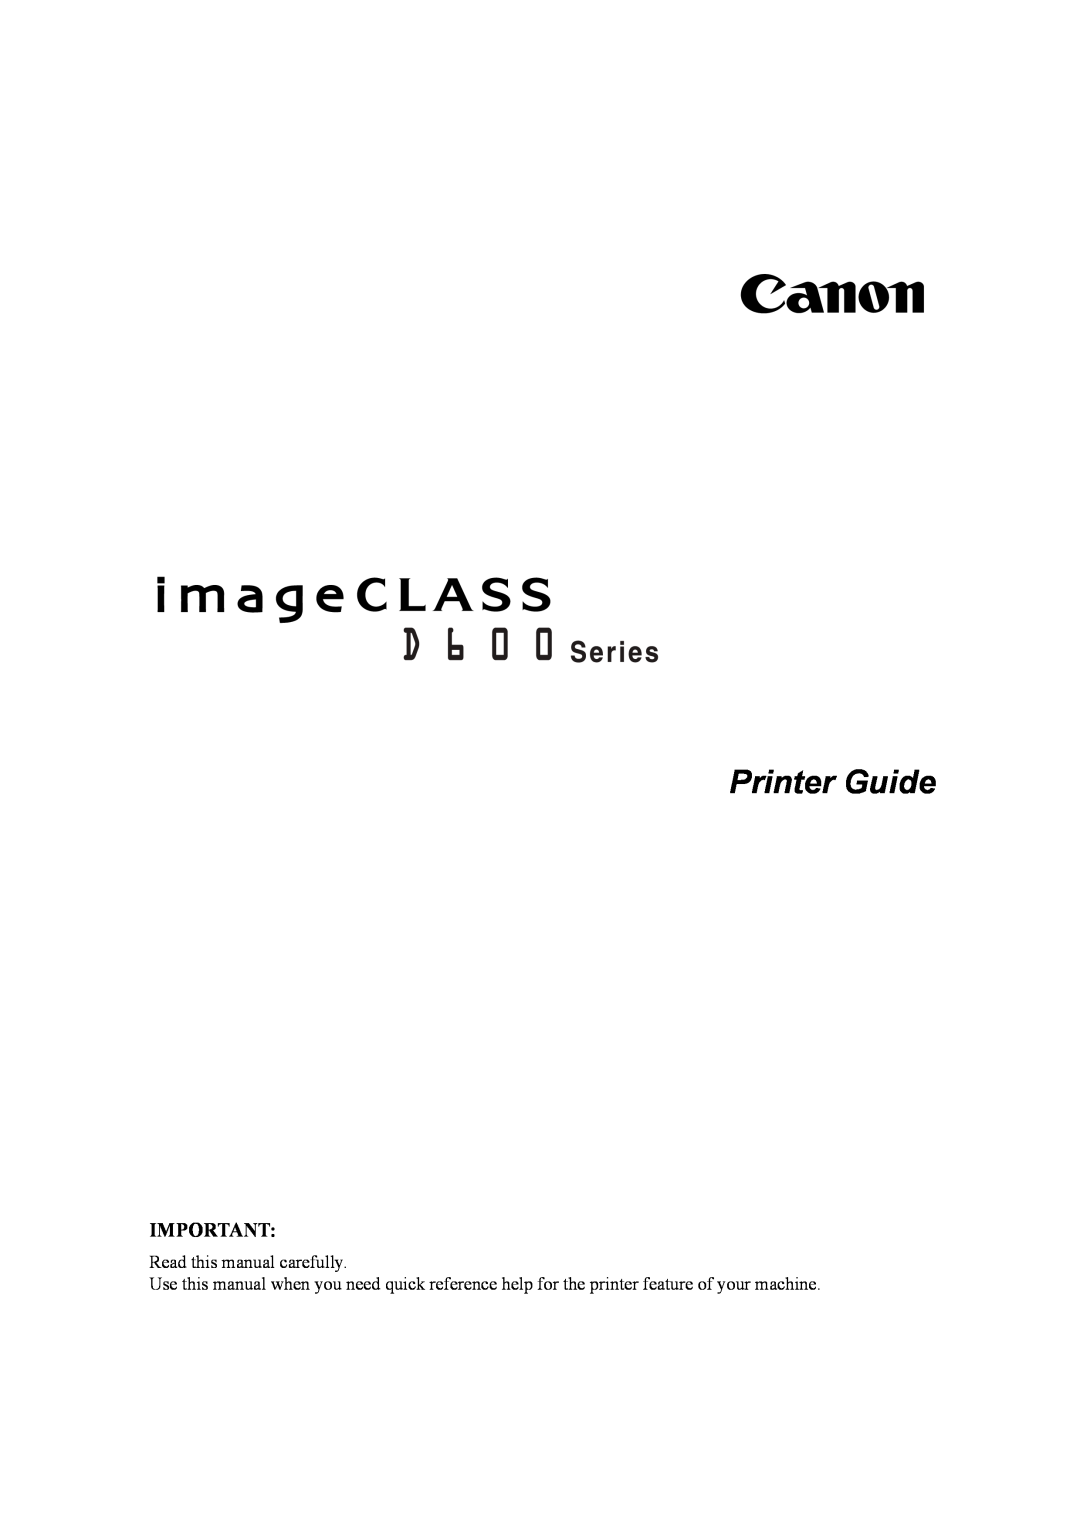 Canon D600 manual Printer Guide, Read this manual carefully 